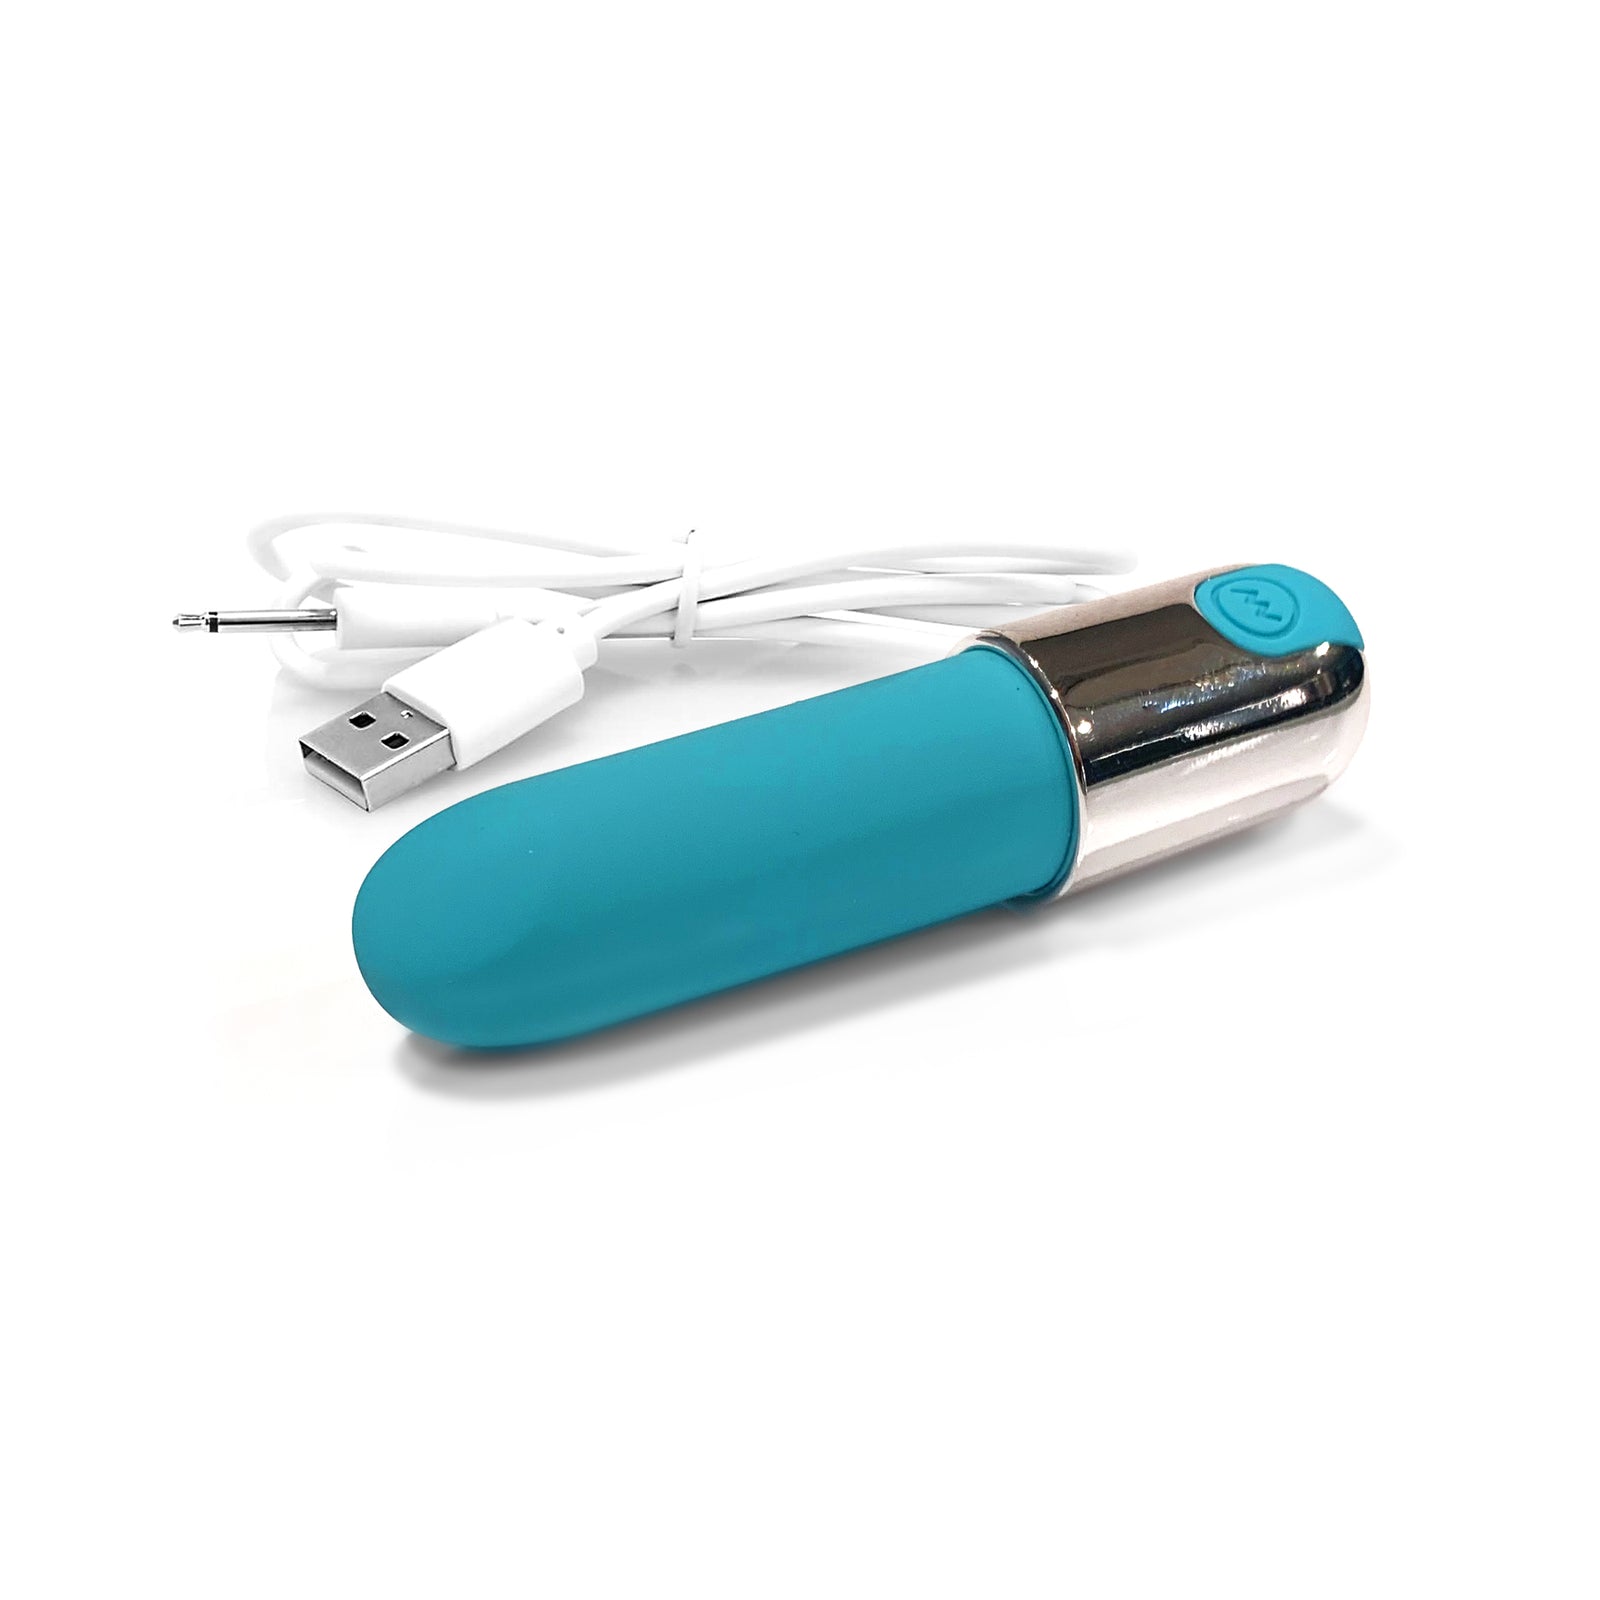 NIXIE Smooch Rechargeable Lipstick Vibrator, Blue Ombre - THES